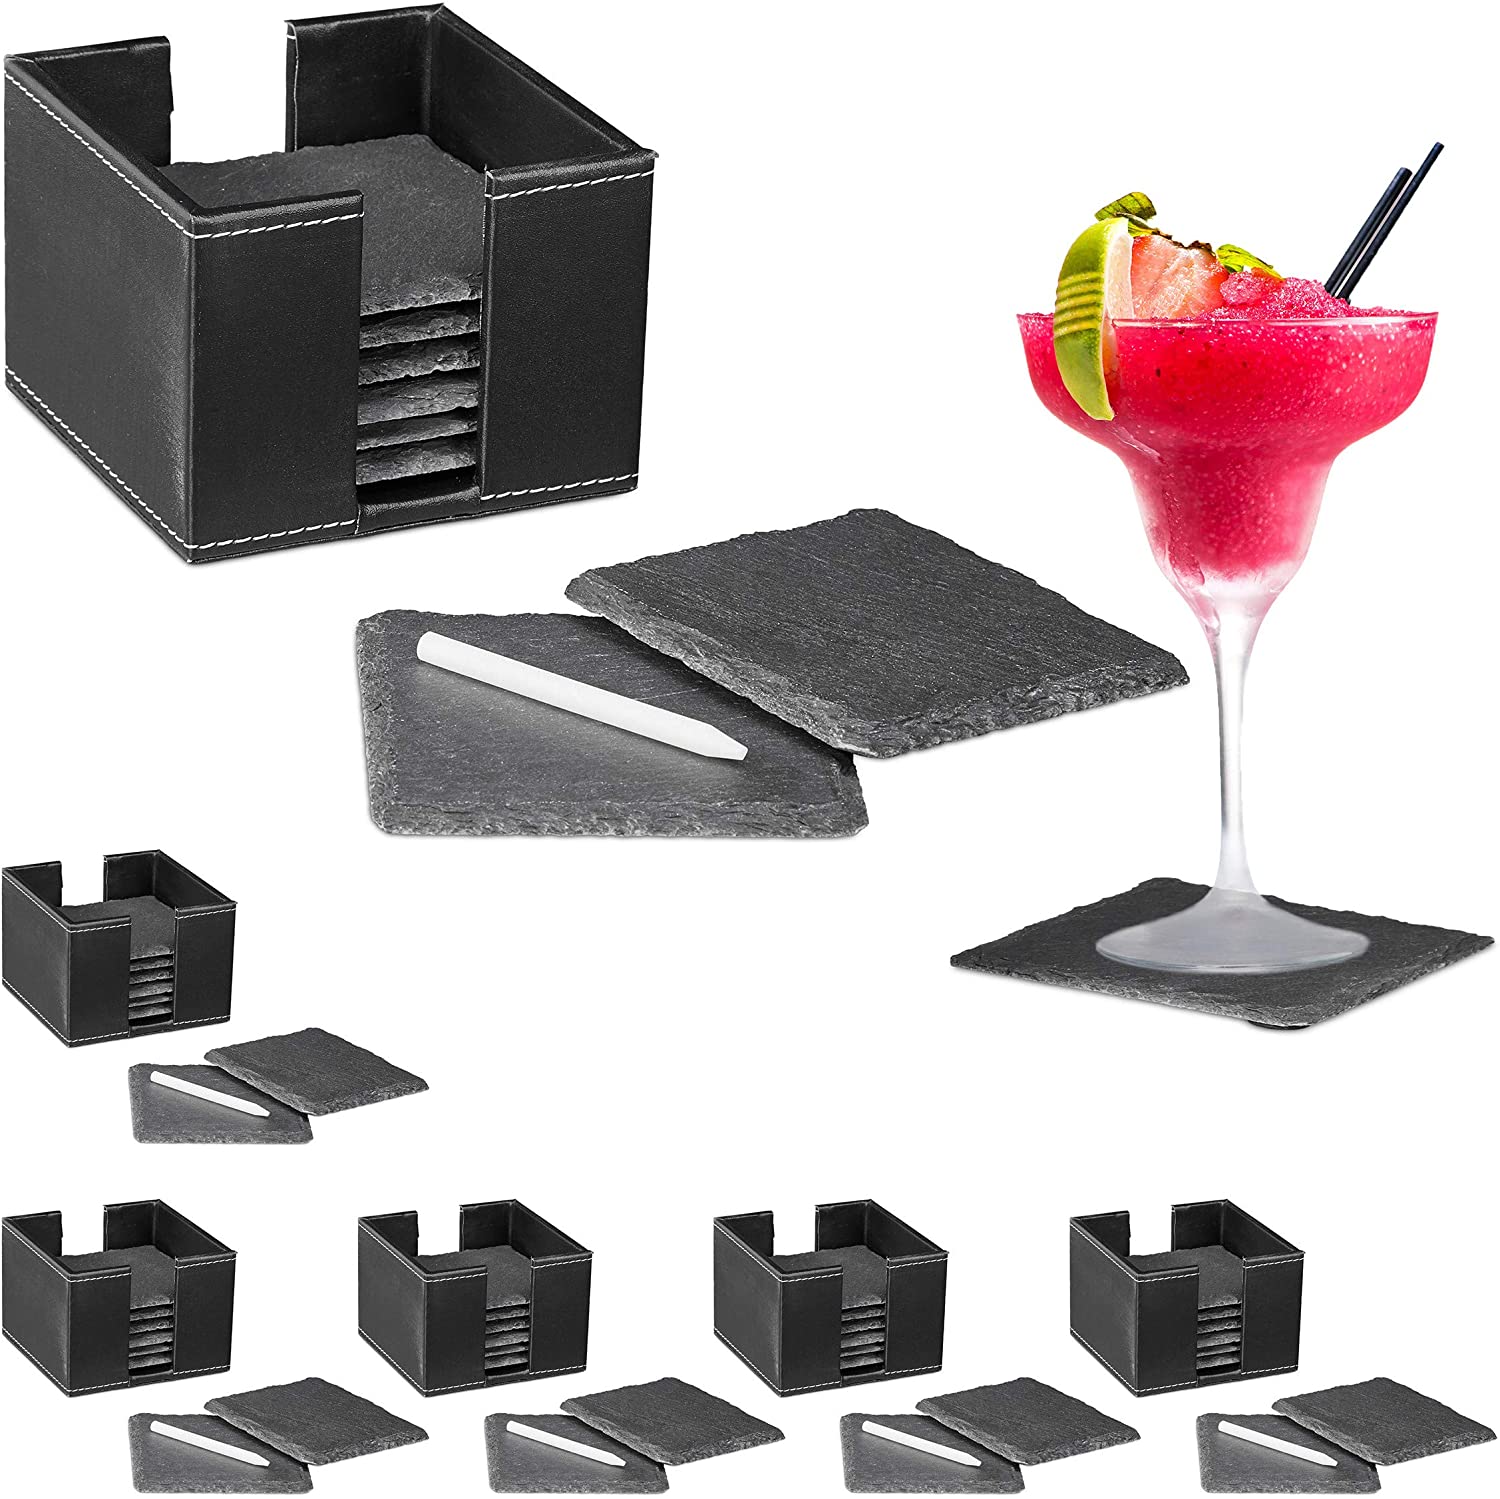 48 x Slate Coasters in a Set, Glass Coasters with 6 x Box, Chalk for Labelling, Square, 10 x 10 cm, Black